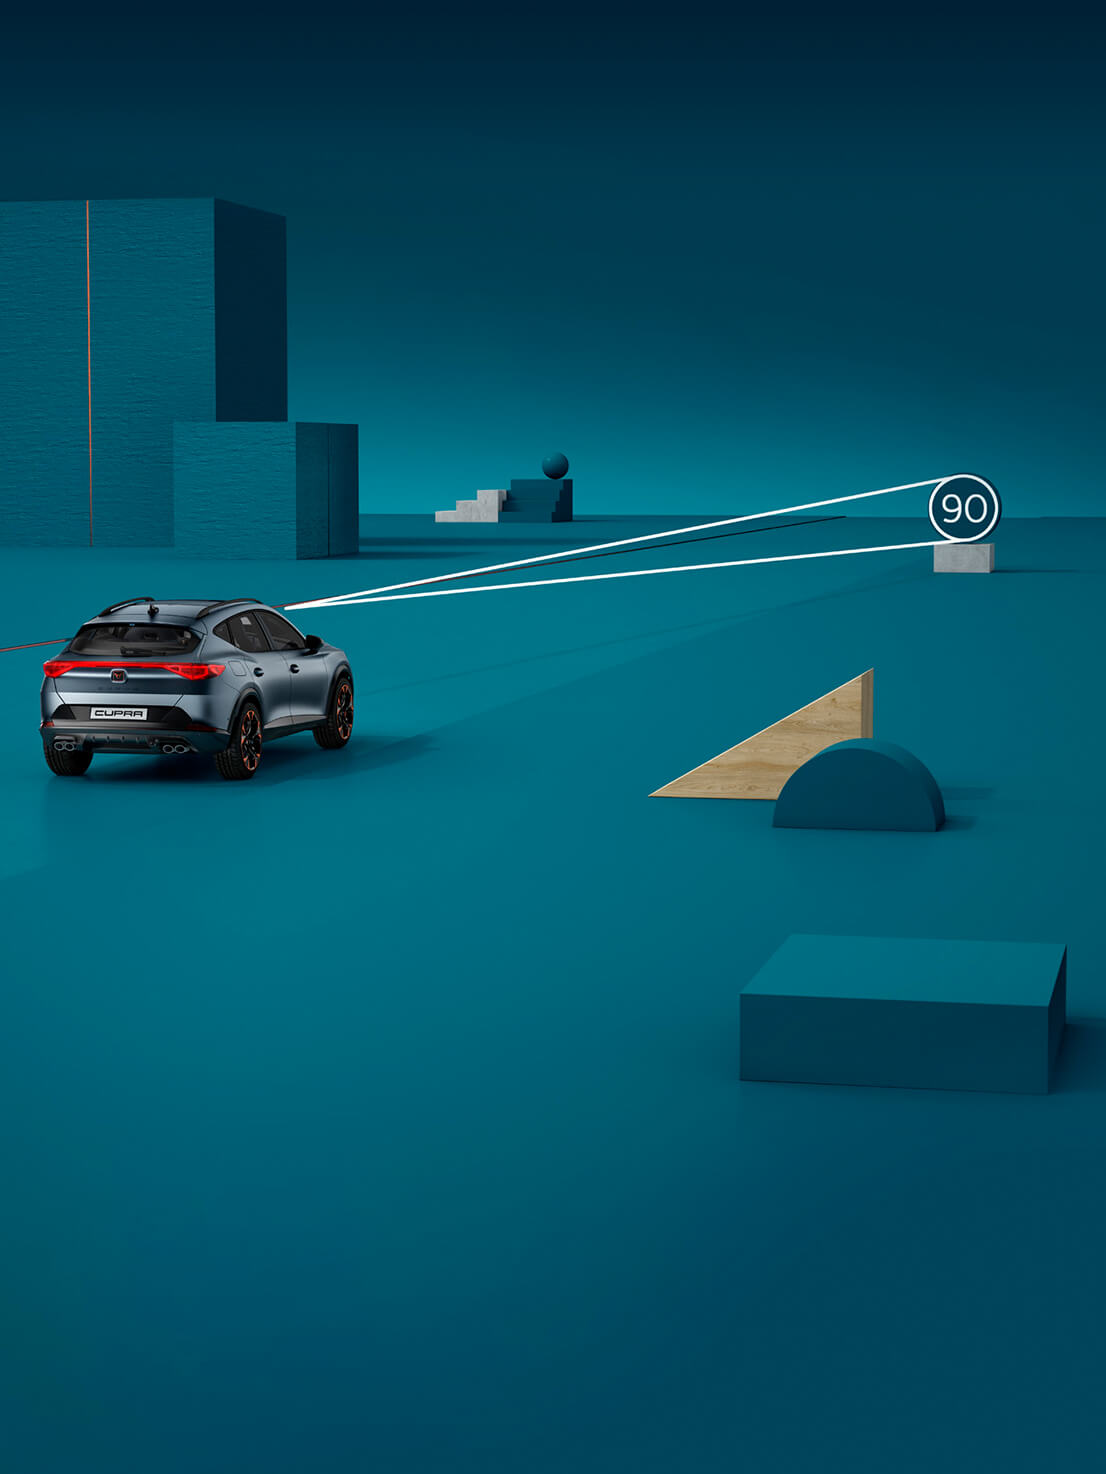 new CUPRA Leon Sportstourer ehybrid Family Sports Car with traffic recognition technology